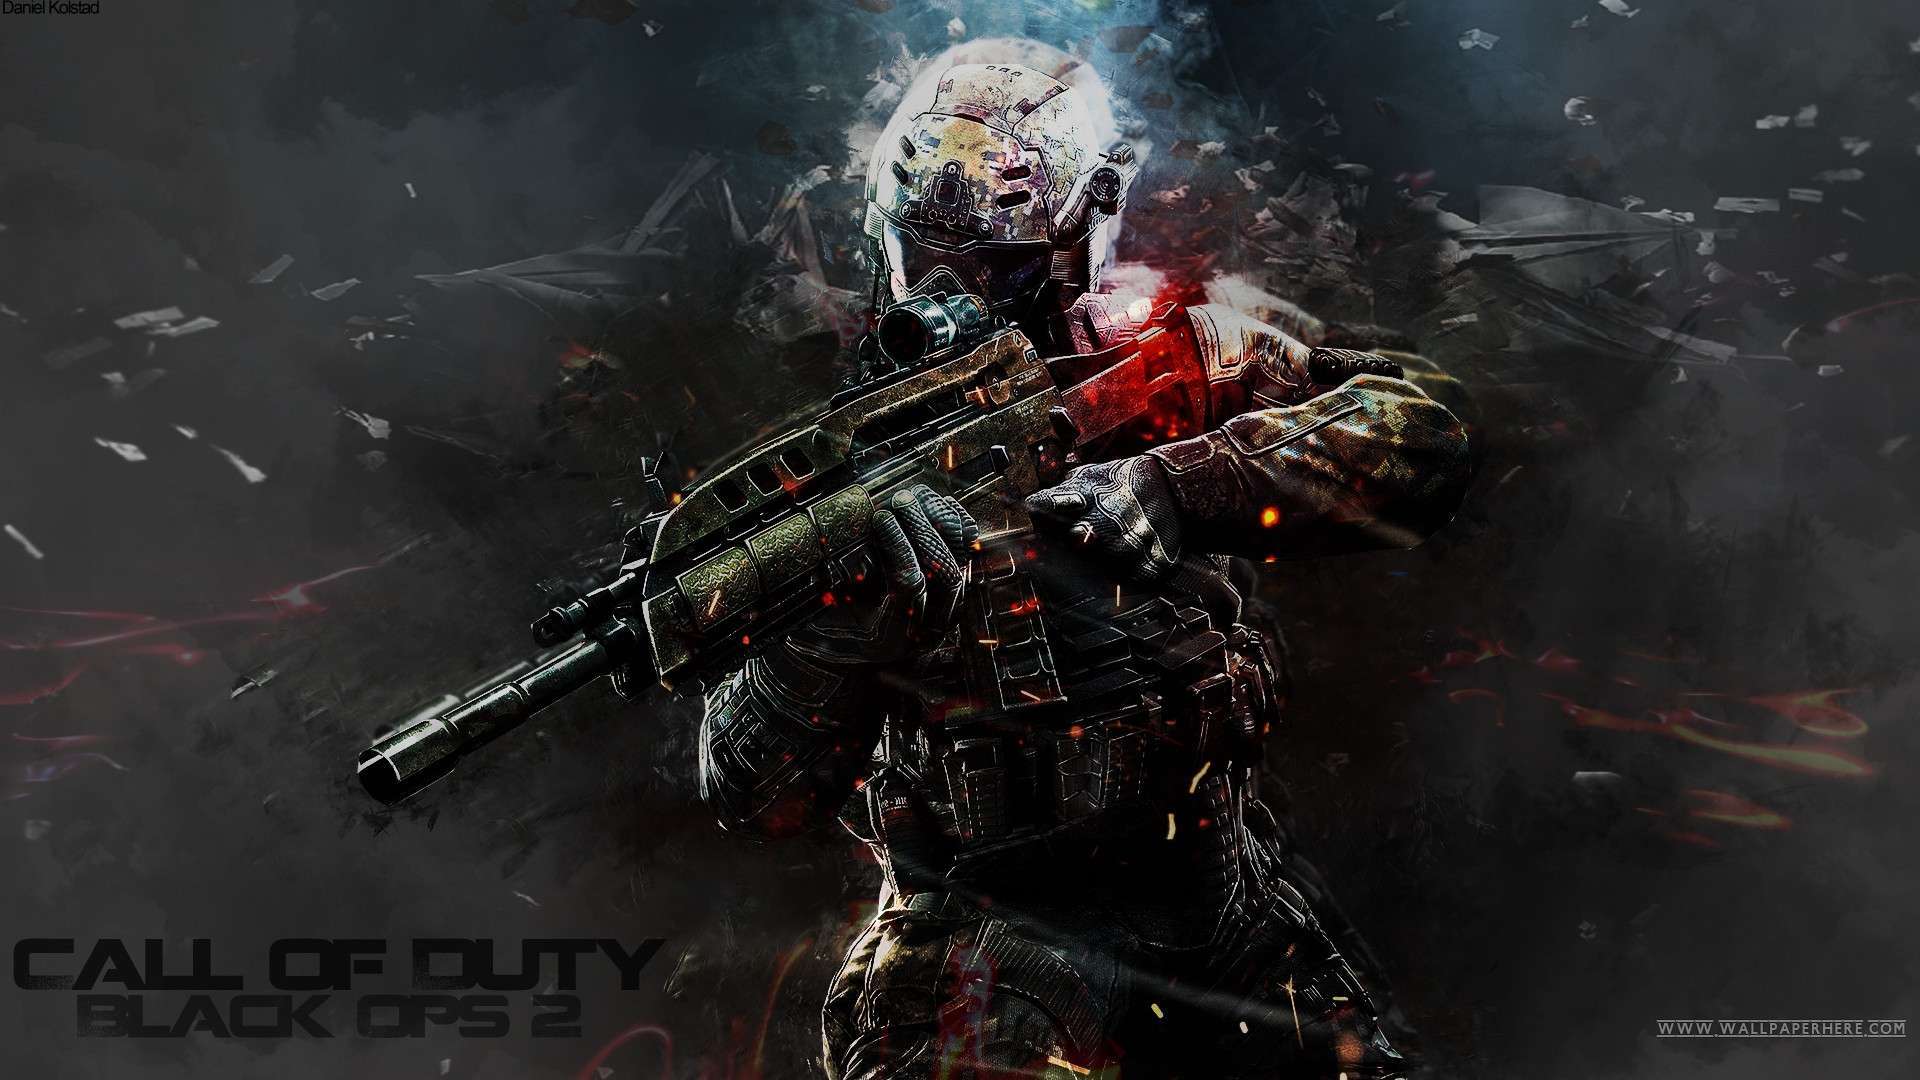 View Of Call Of Duty Game Desktop Wallpaper Nice Wallpapers 1920x1080